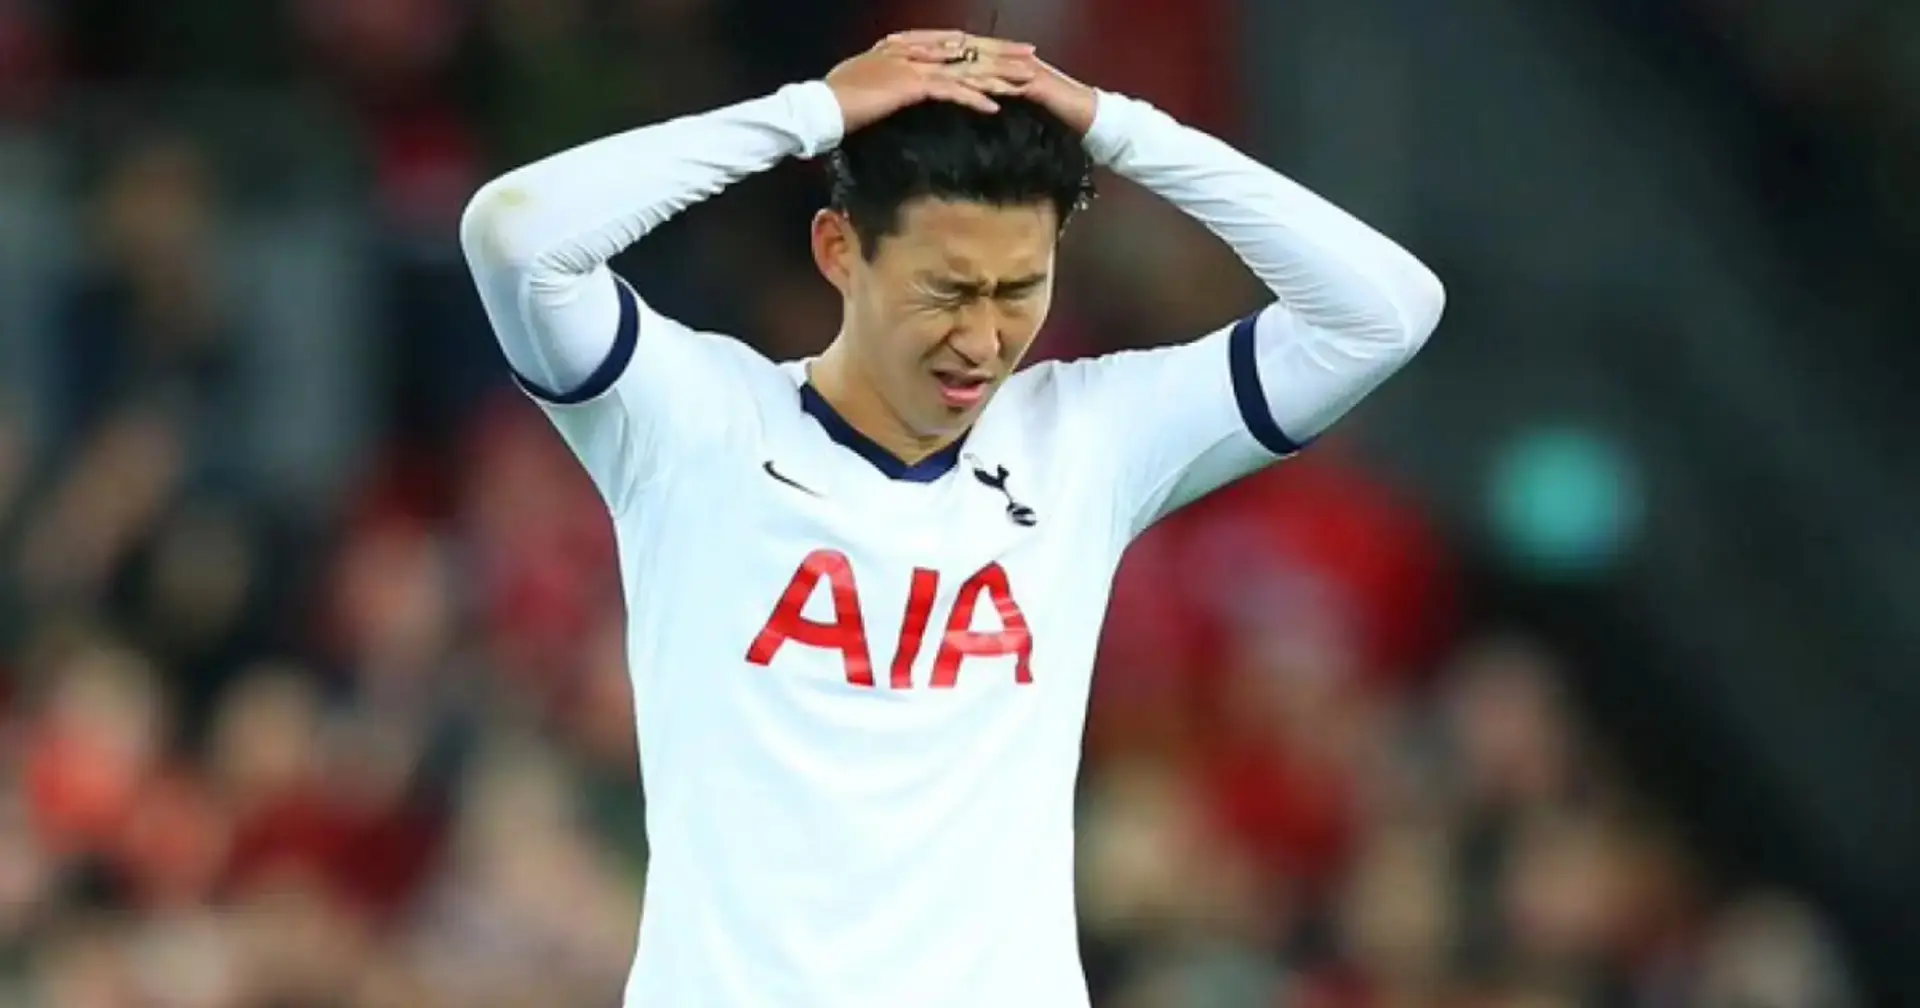 'Real drop-off after winning league last month': Liverpool fans amused by Spurs' 3 defeats in a row